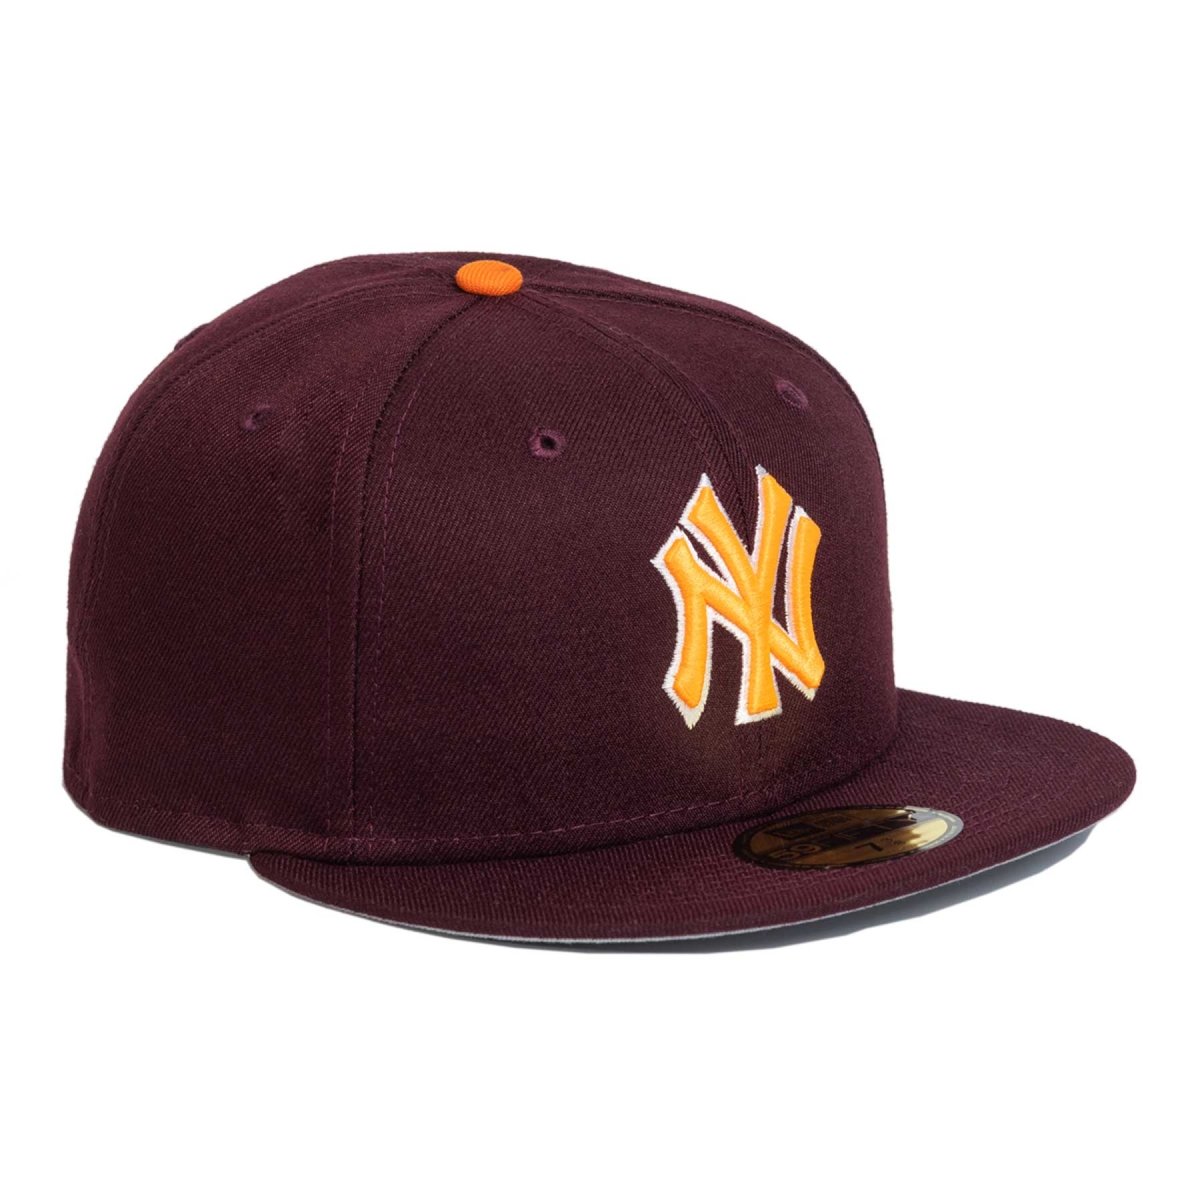 West NYC x New Era 59FIFTY New York Yankees Virginia Tech Fitted Hat - West NYC 7 / Wine